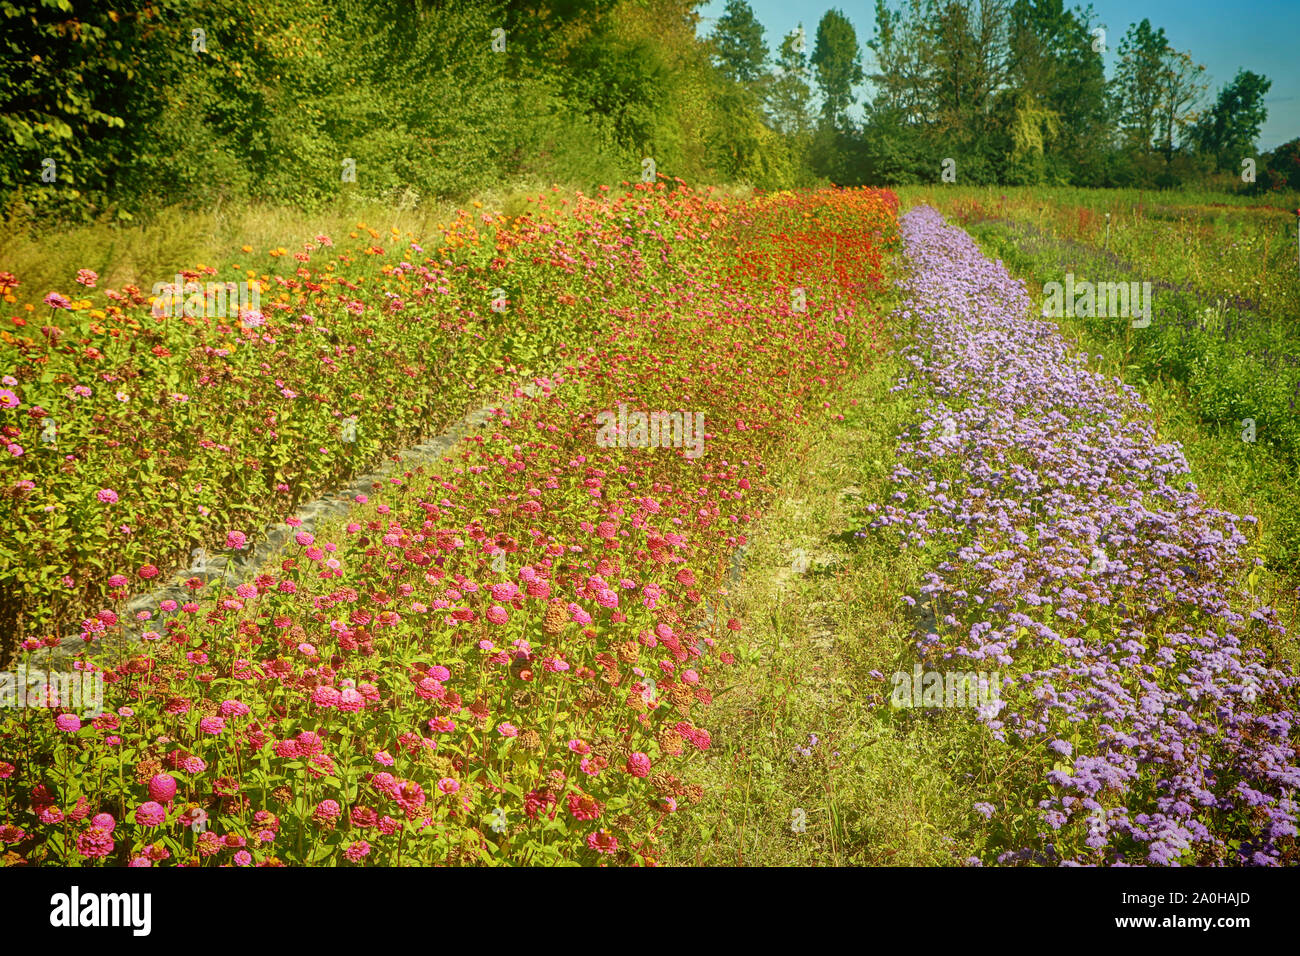 Summer flower cultivation in Bavaria, field with colorful pretty flowers ready to be cut for the market Stock Photo